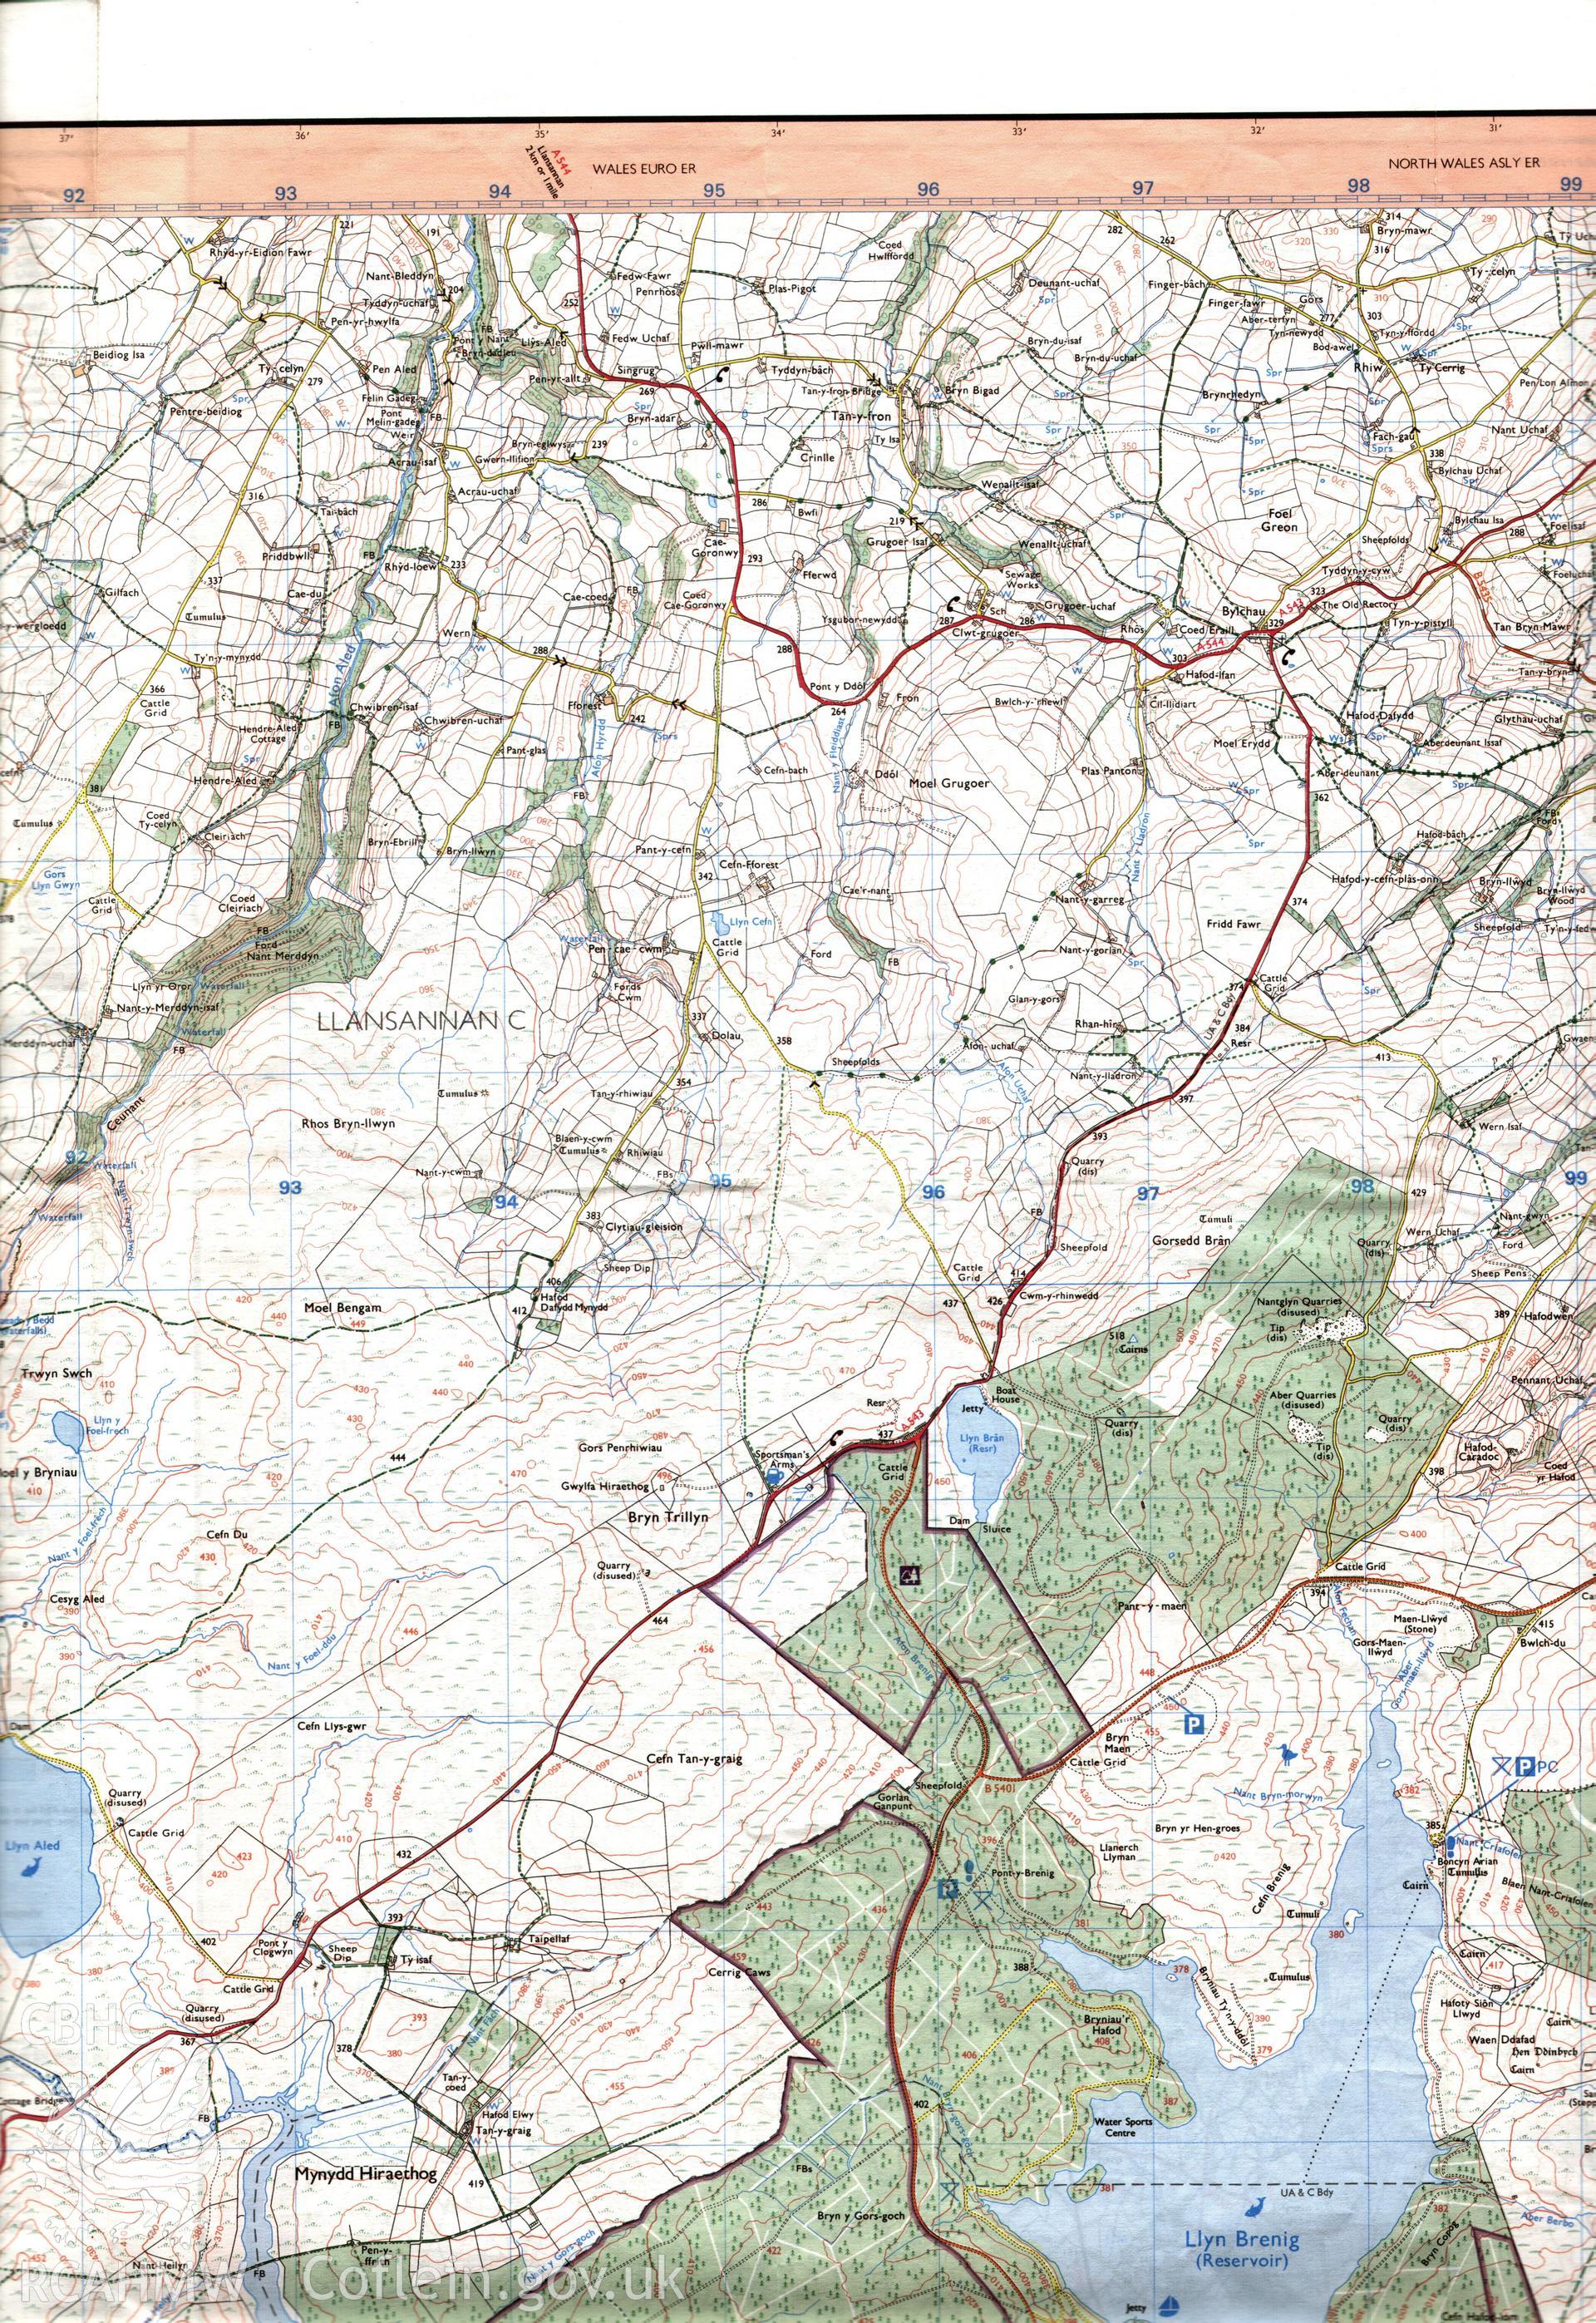 Digital copy of an Ordnance Survey map extract, showing the survey area.